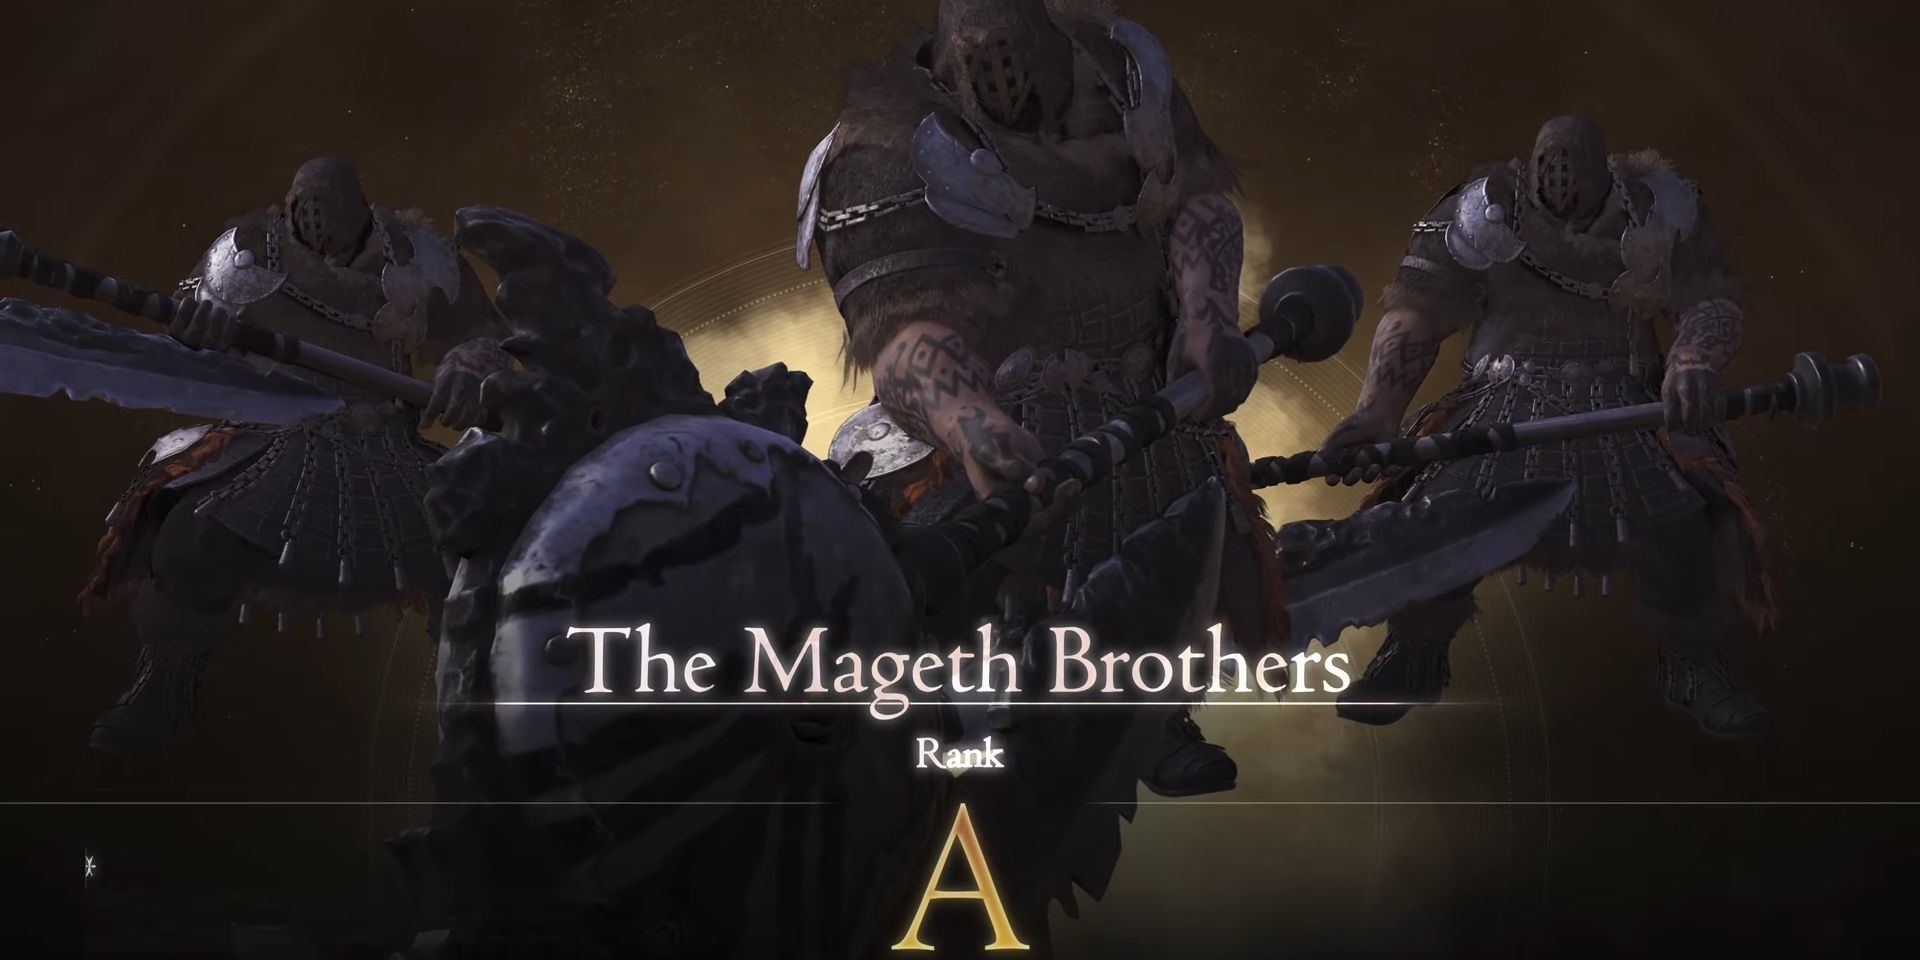 Final Fantasy 16's Mageth Brothers Hunt card, showing their are an A-Rank target. The three warriors hold their axes in hand.